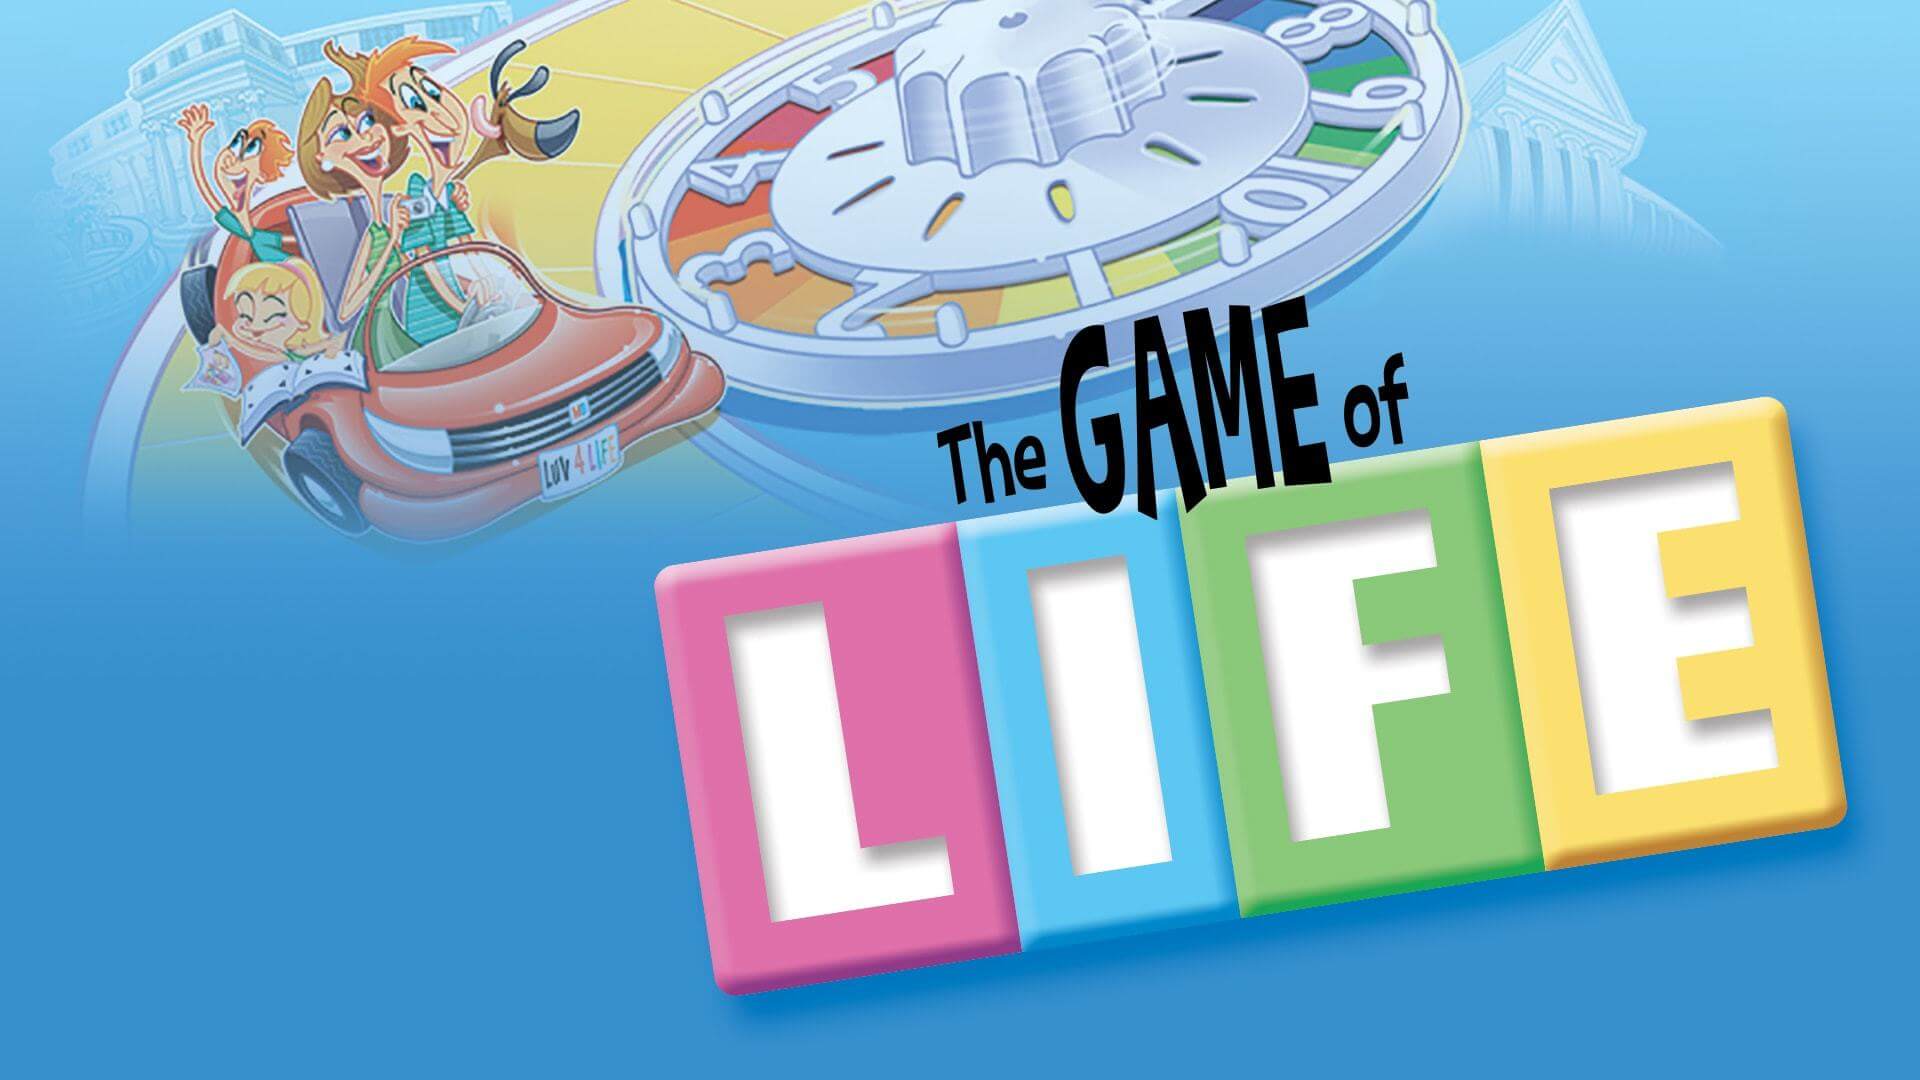 the-game-of-life-1920x1080-8.jpg